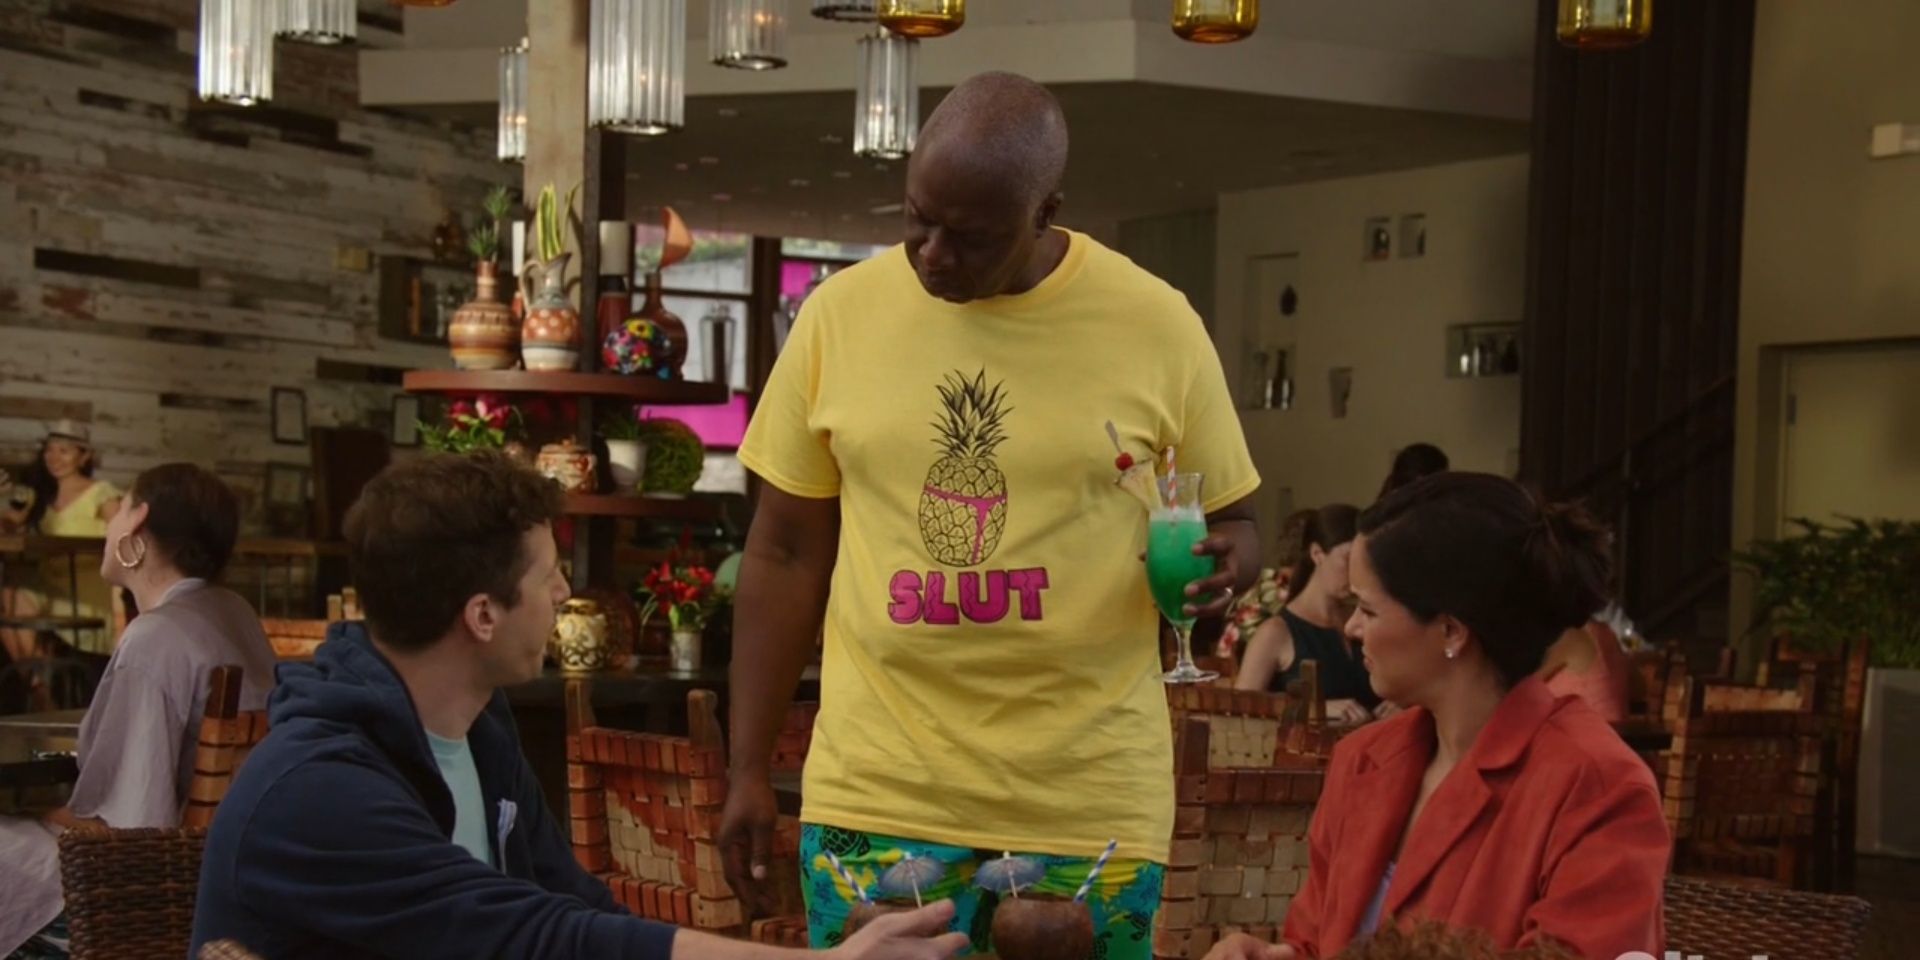 Holt interrupts Jake and Amy wearing a funny shirt